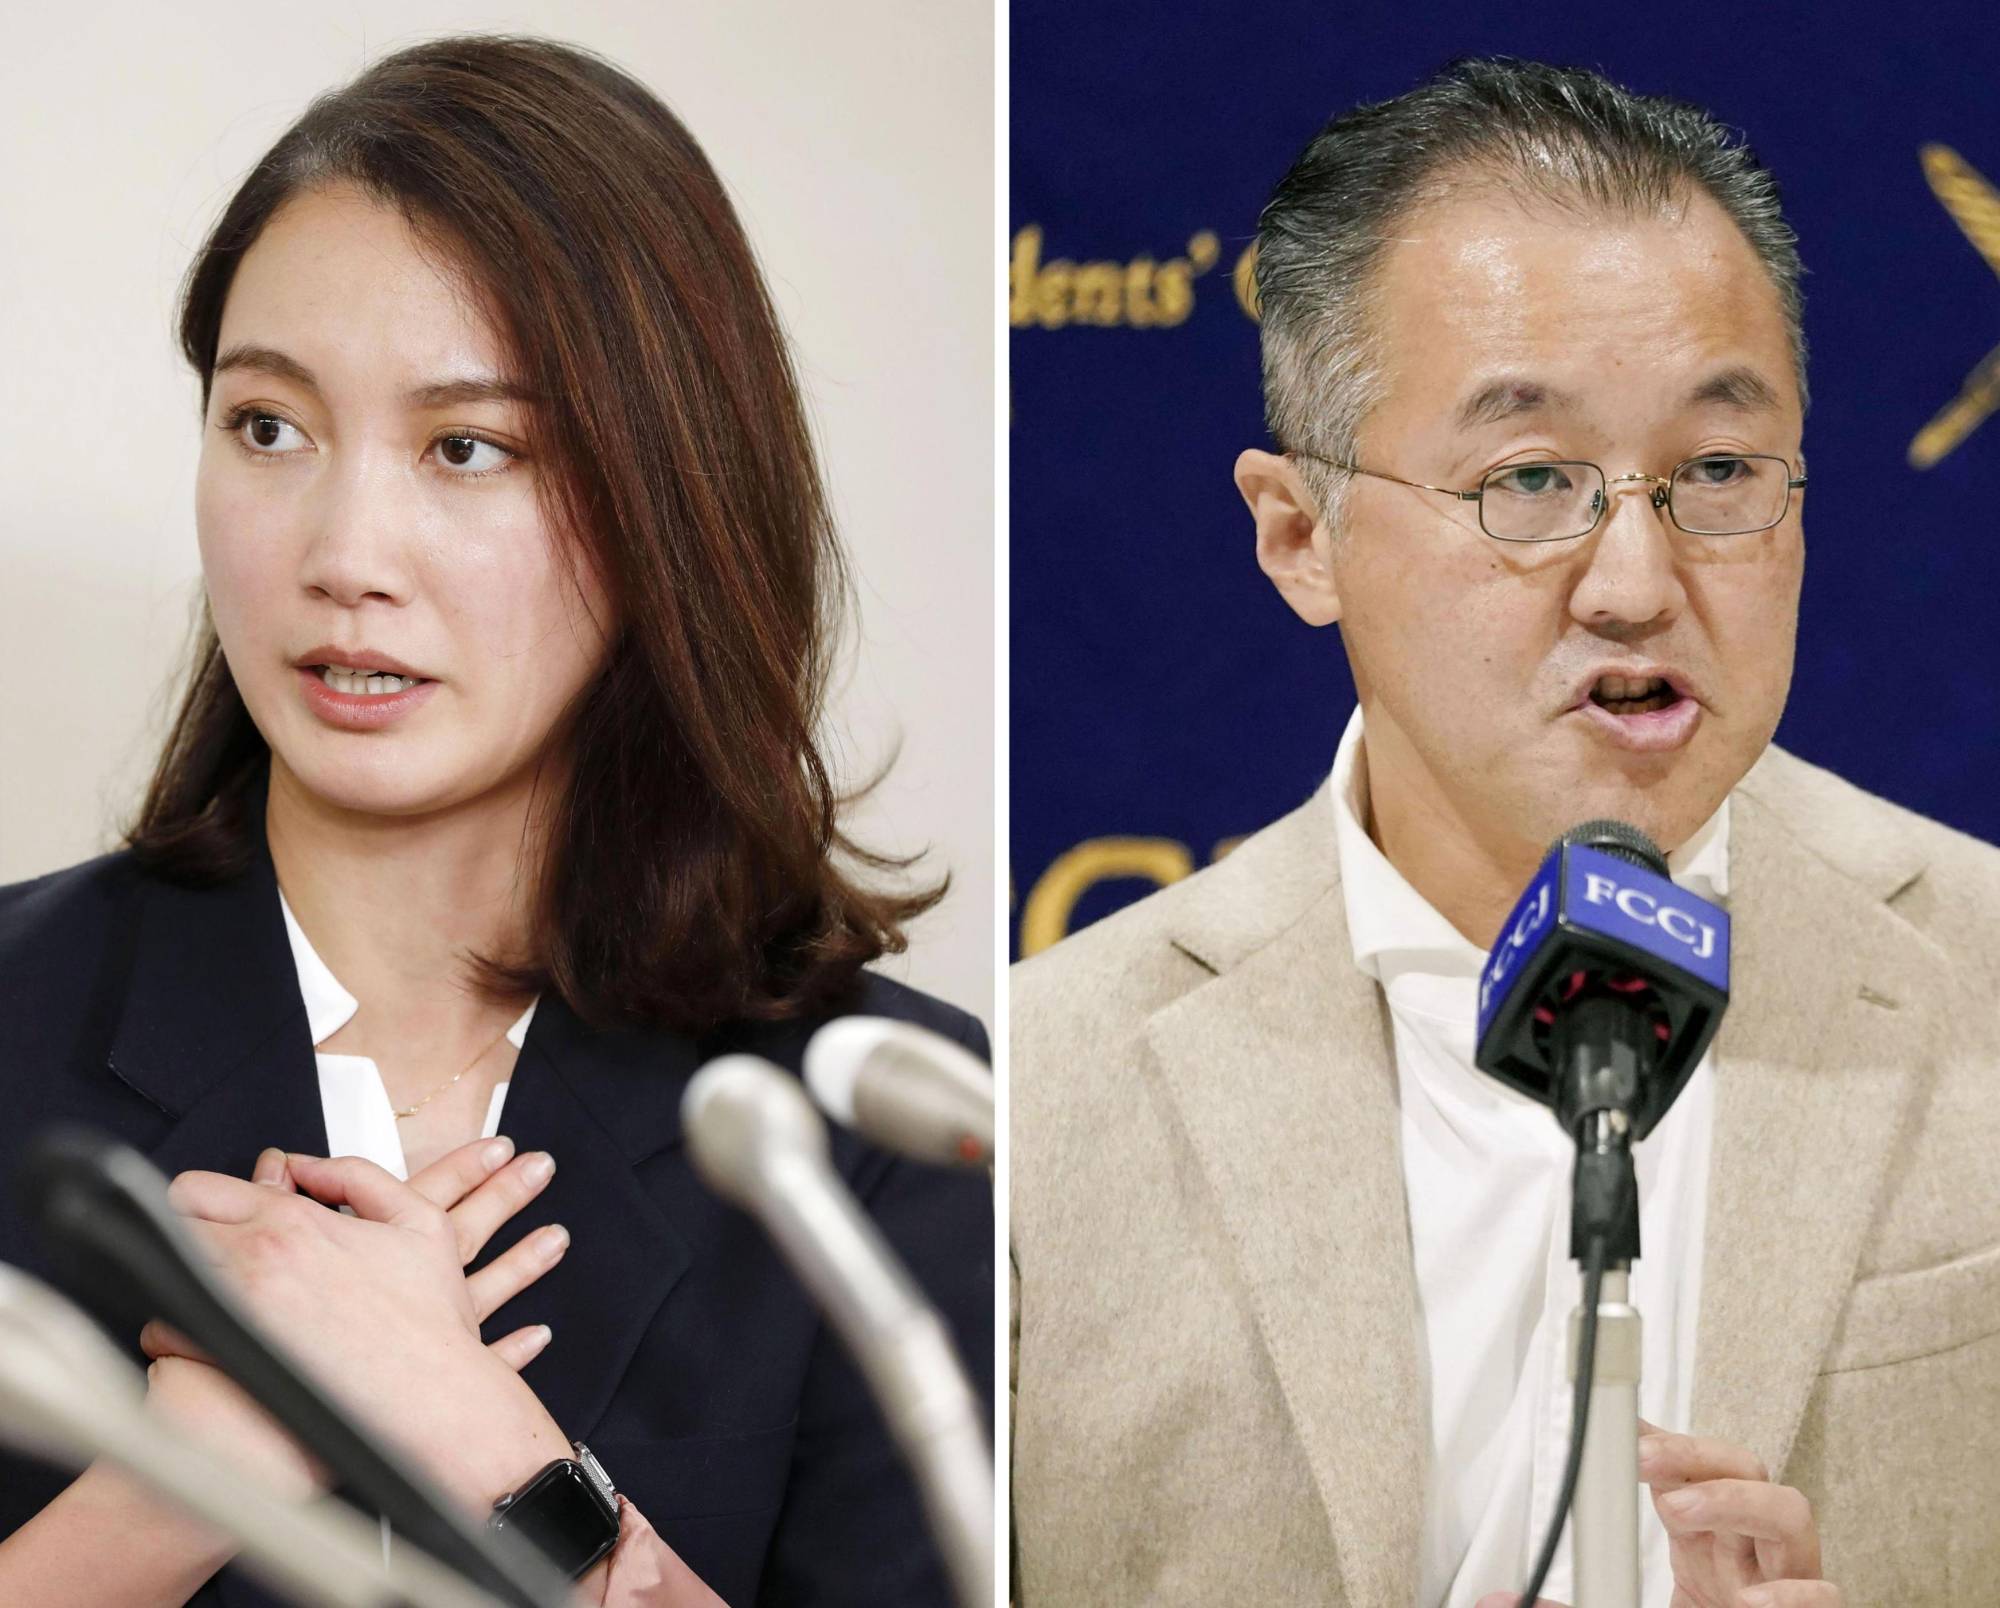 Symbol of Japans #MeToo movement again awarded damages in rape case